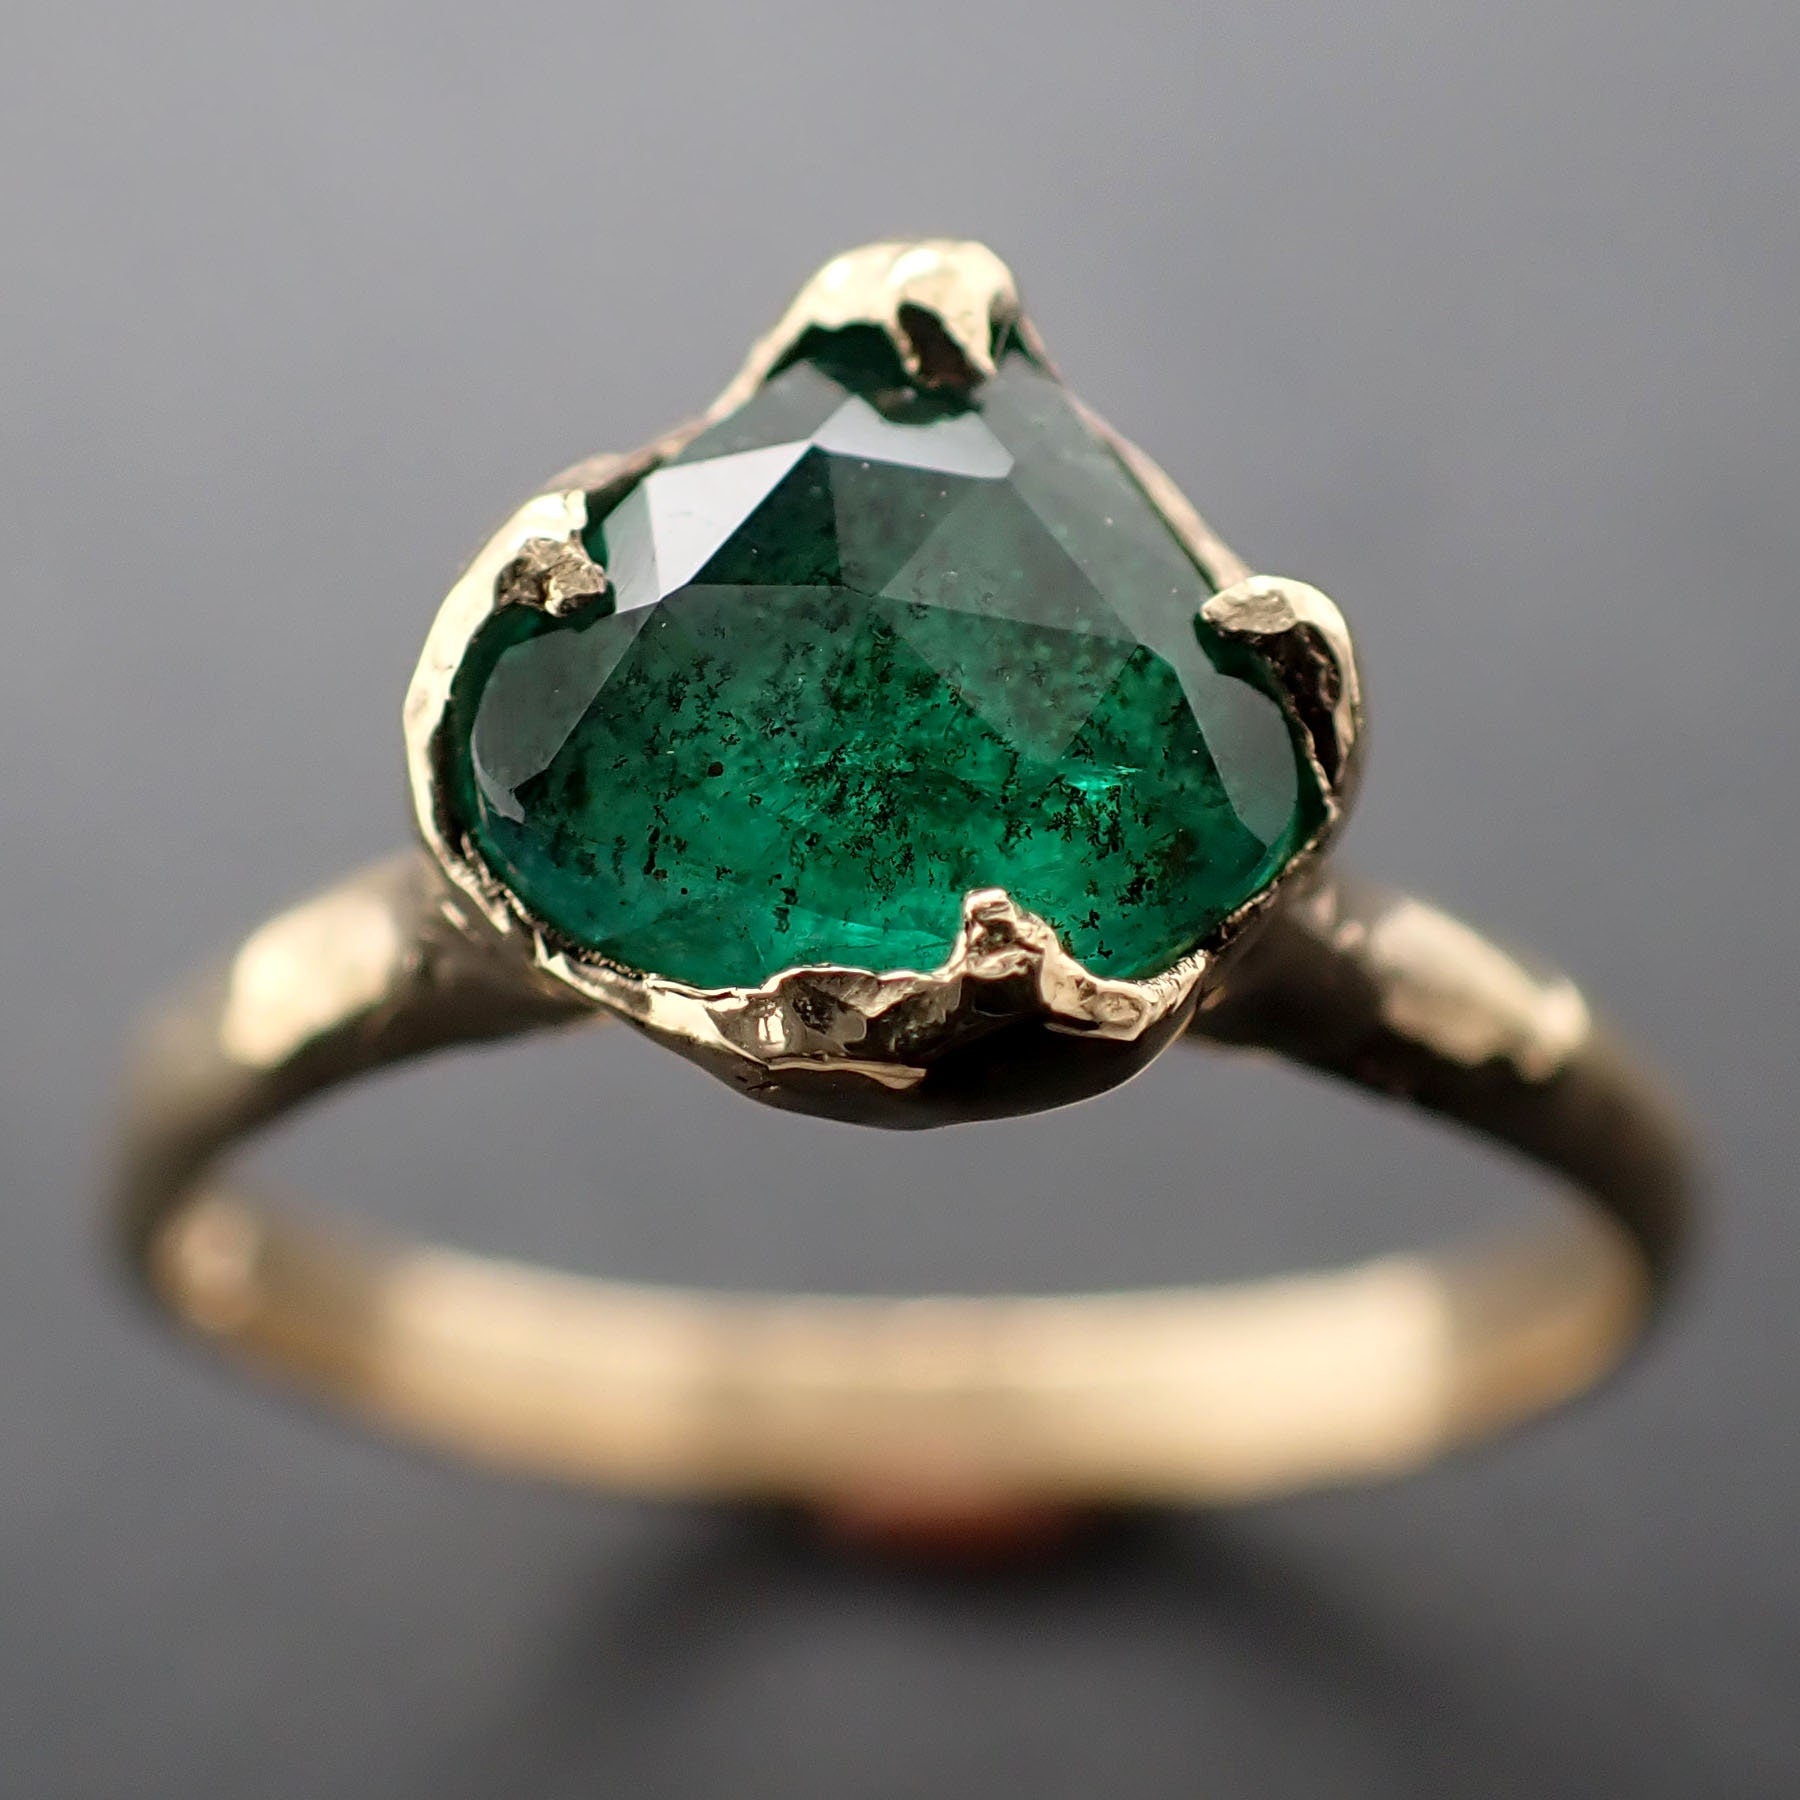 Fancy cut Emerald Solitaire yellow 18k Gold Ring Birthstone One Of a Kind Gemstone Ring Recycled 3325